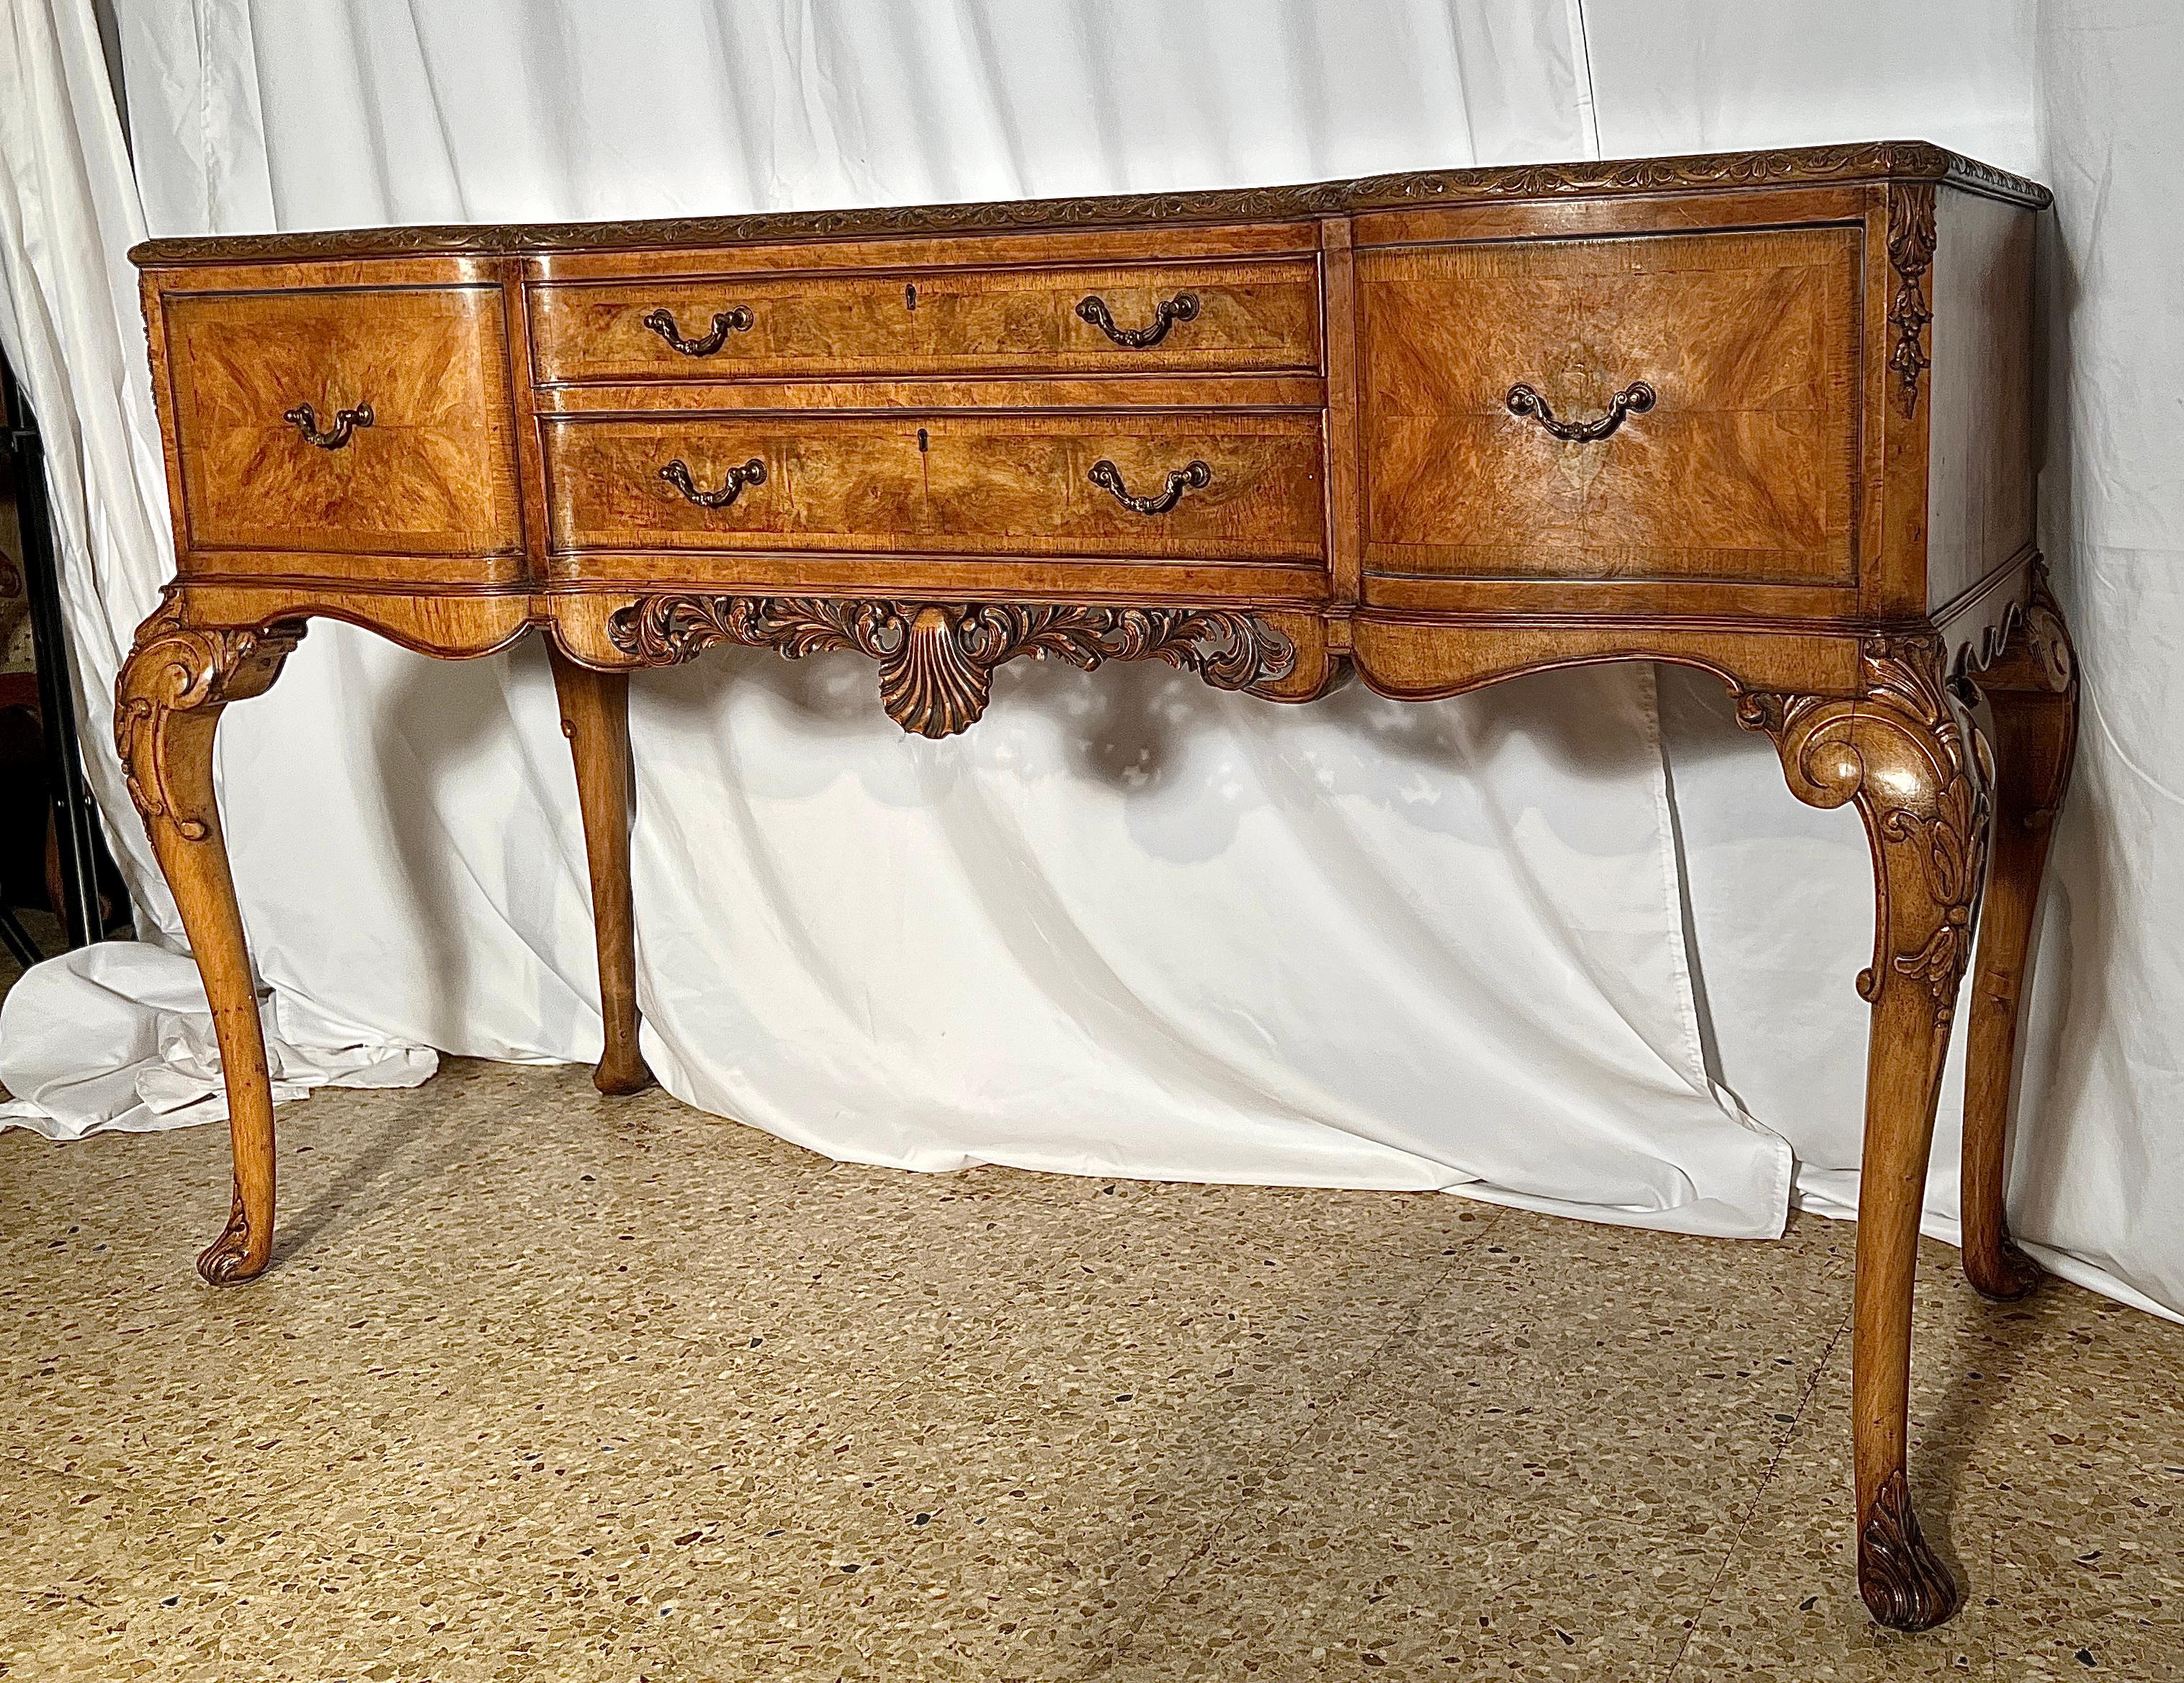 Antique English Burled Walnut Silver Chest on Legs with Flatware, Circa 1900. For Sale 1